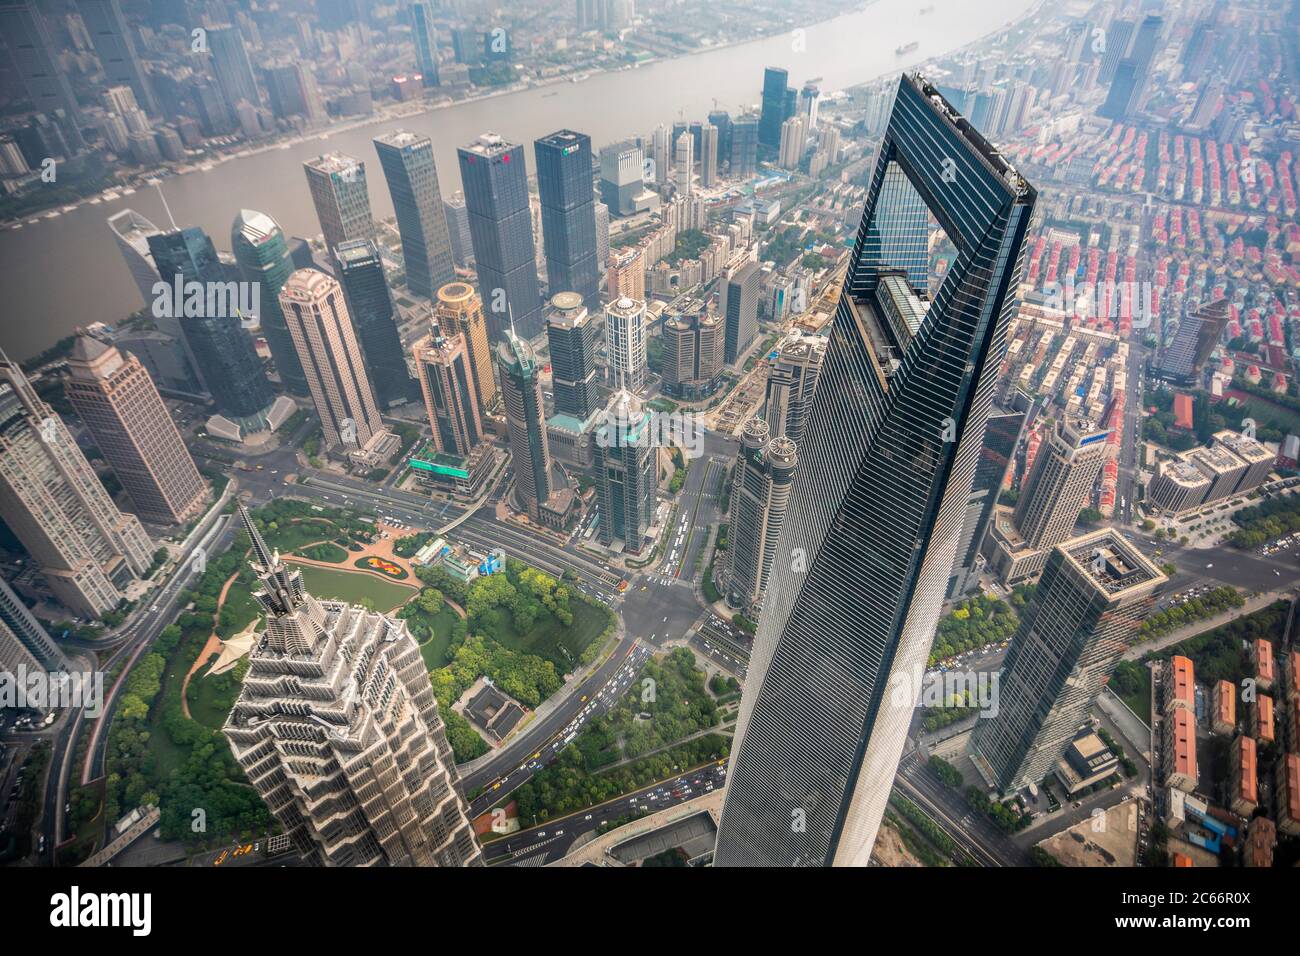 China, Shanghai City, Pudong District, Lujiazui Area, World Financial Center Stockfoto